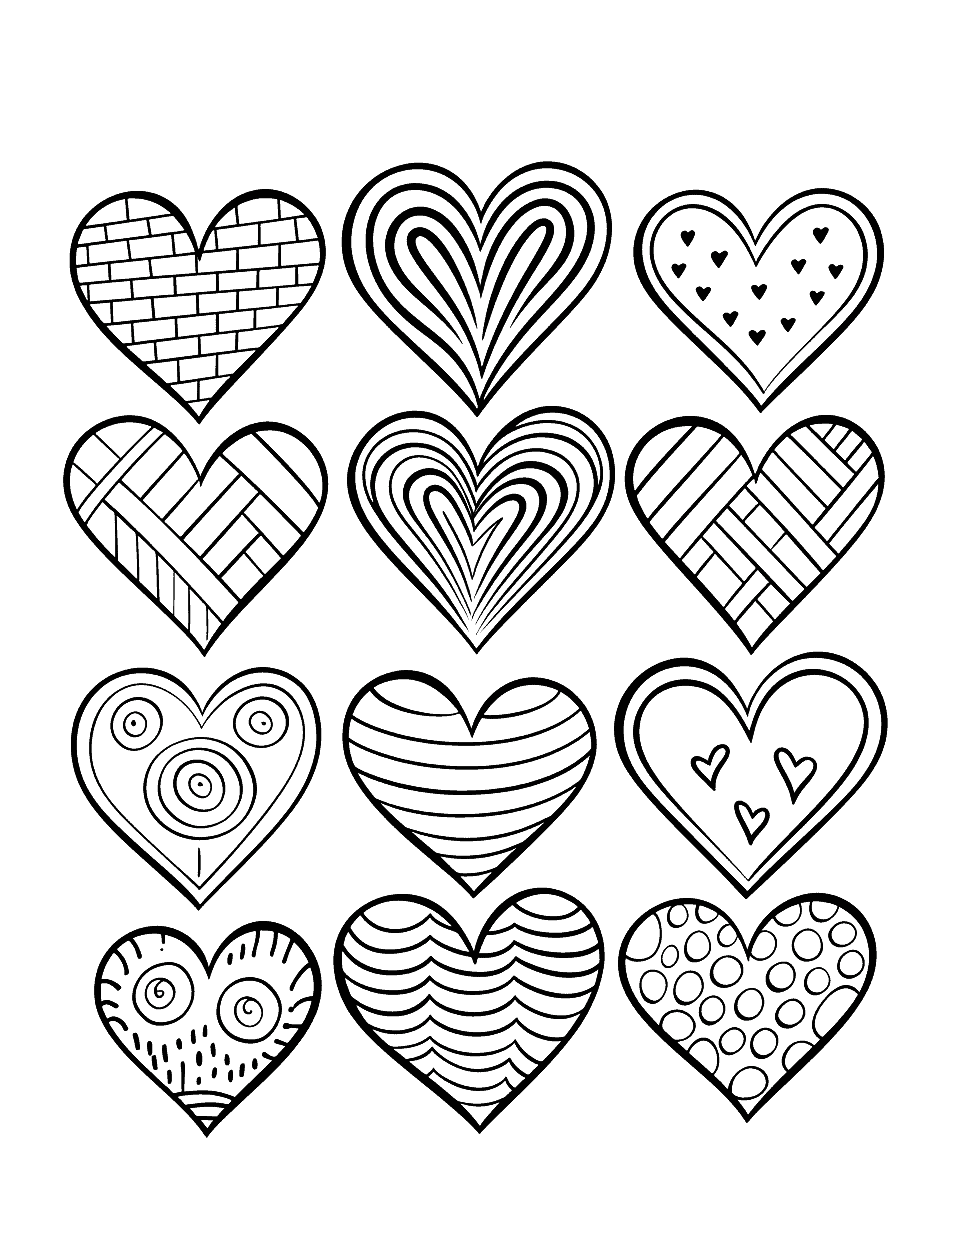 Easy Heart Drawings Coloring Page - Simple and easy heart designs that a young child can easily color.